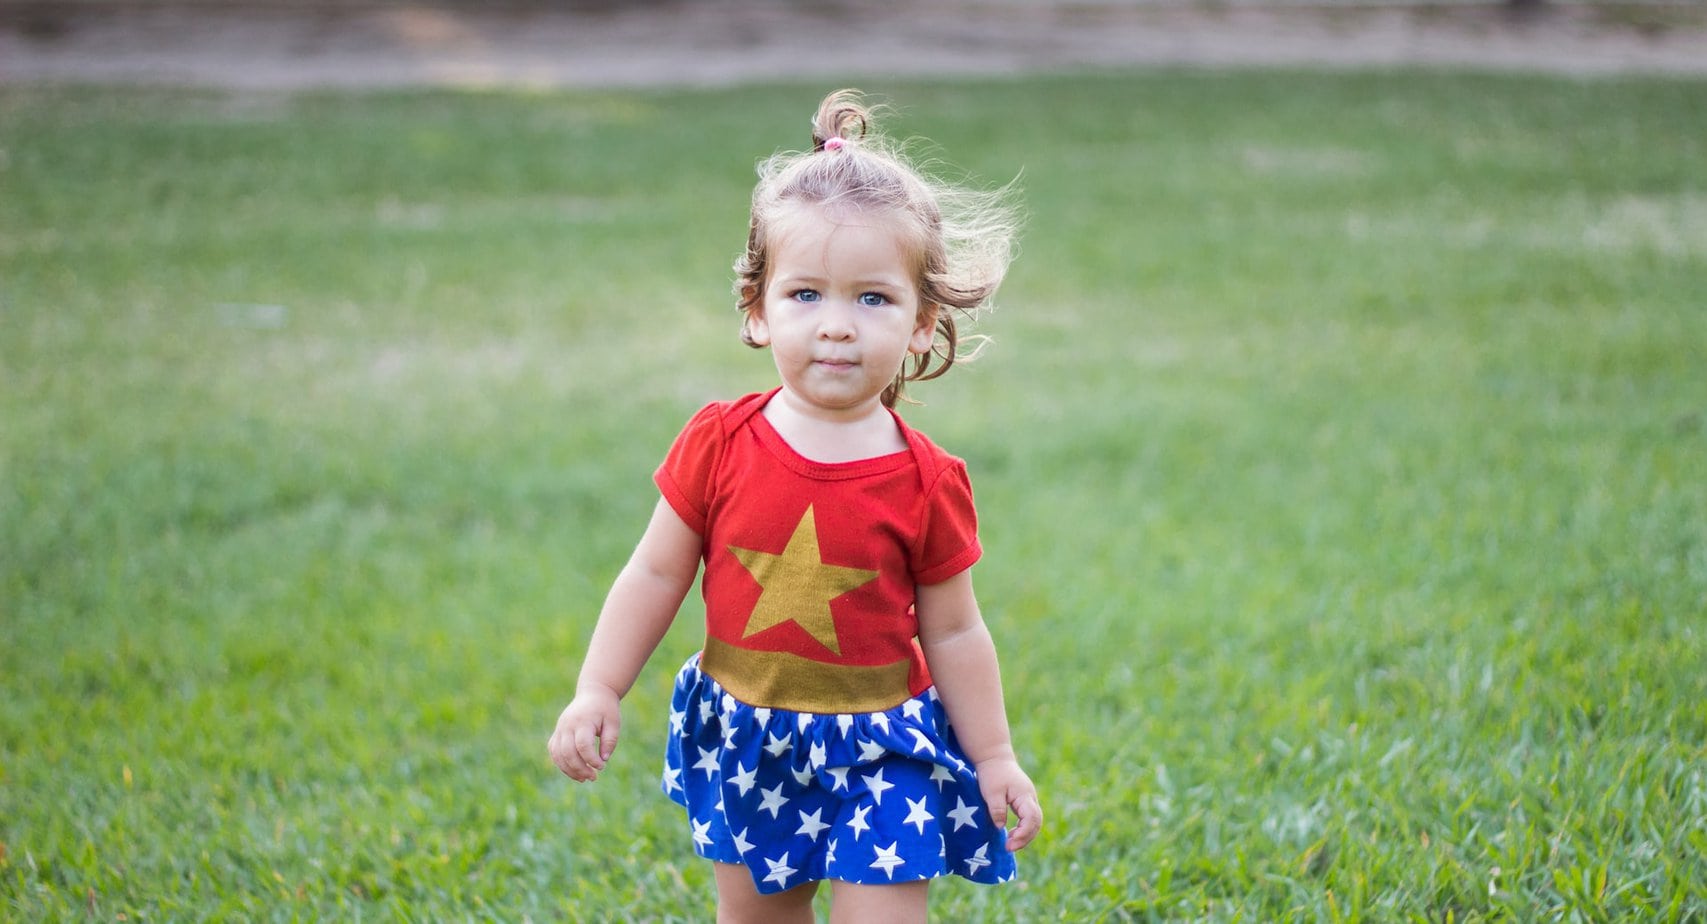 Dresses for kids – How to Choose the Perfect One